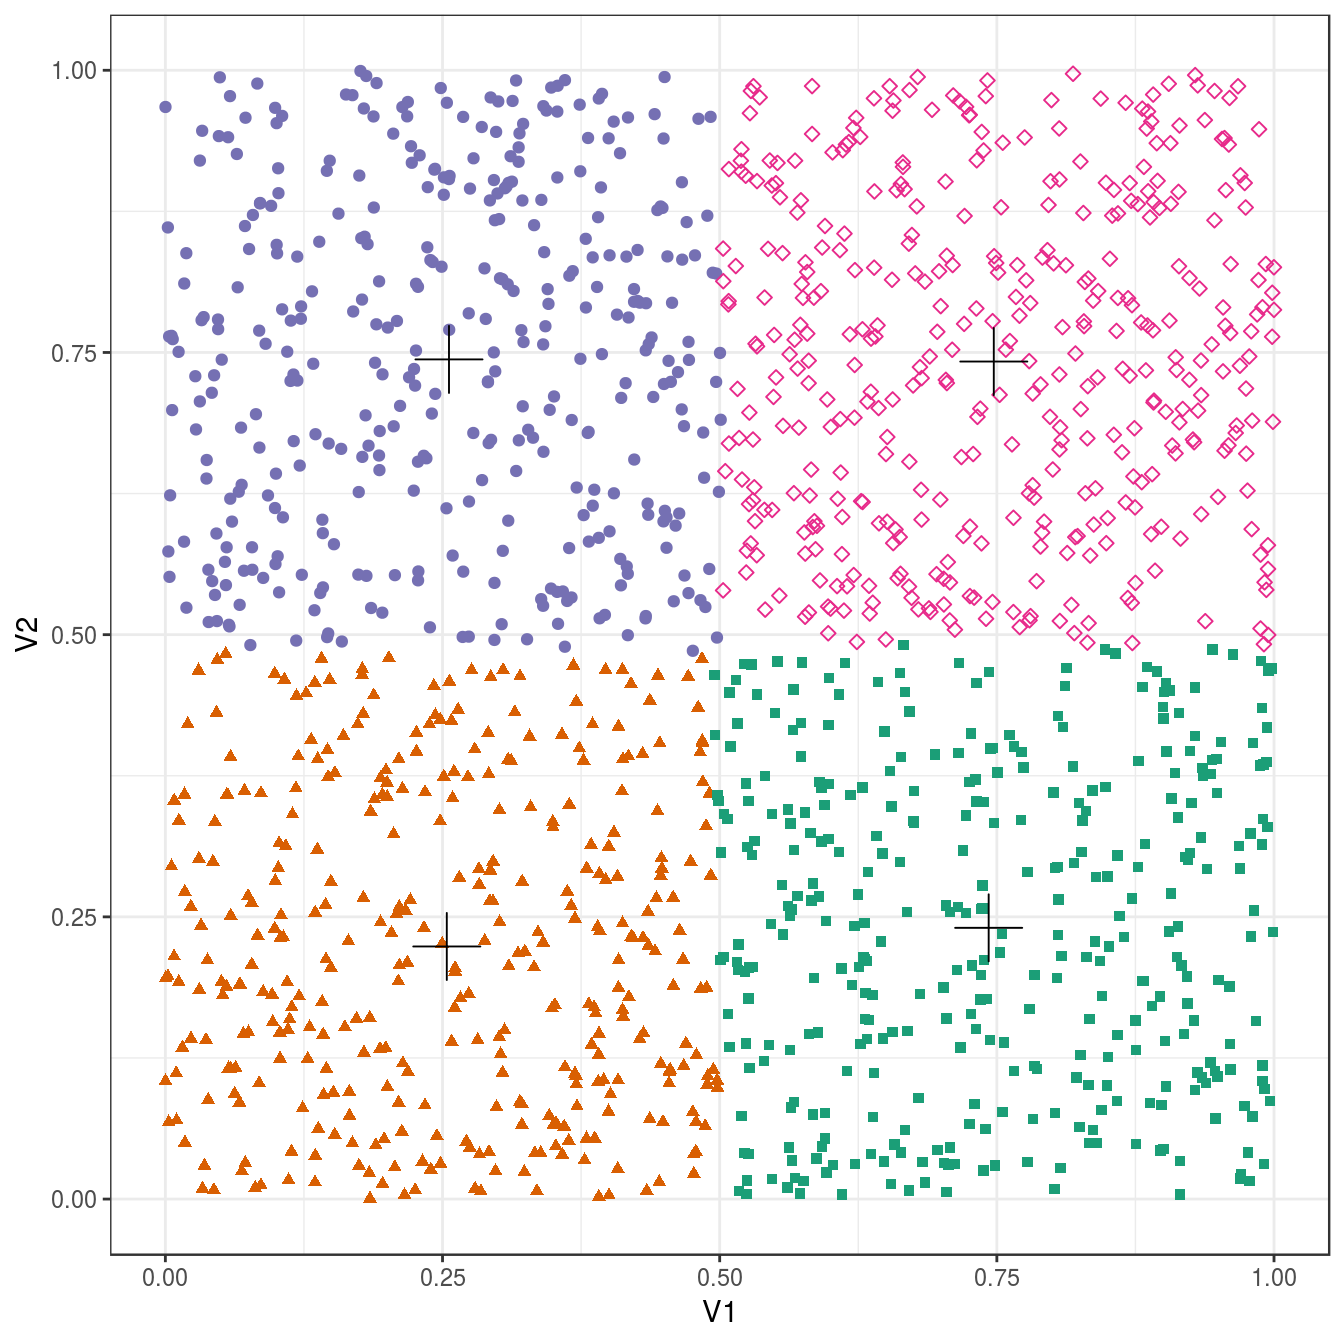 K-means clustering of the data set with no structure: scatterplot of clusters for k=4. Cluster centres indicated with a cross.